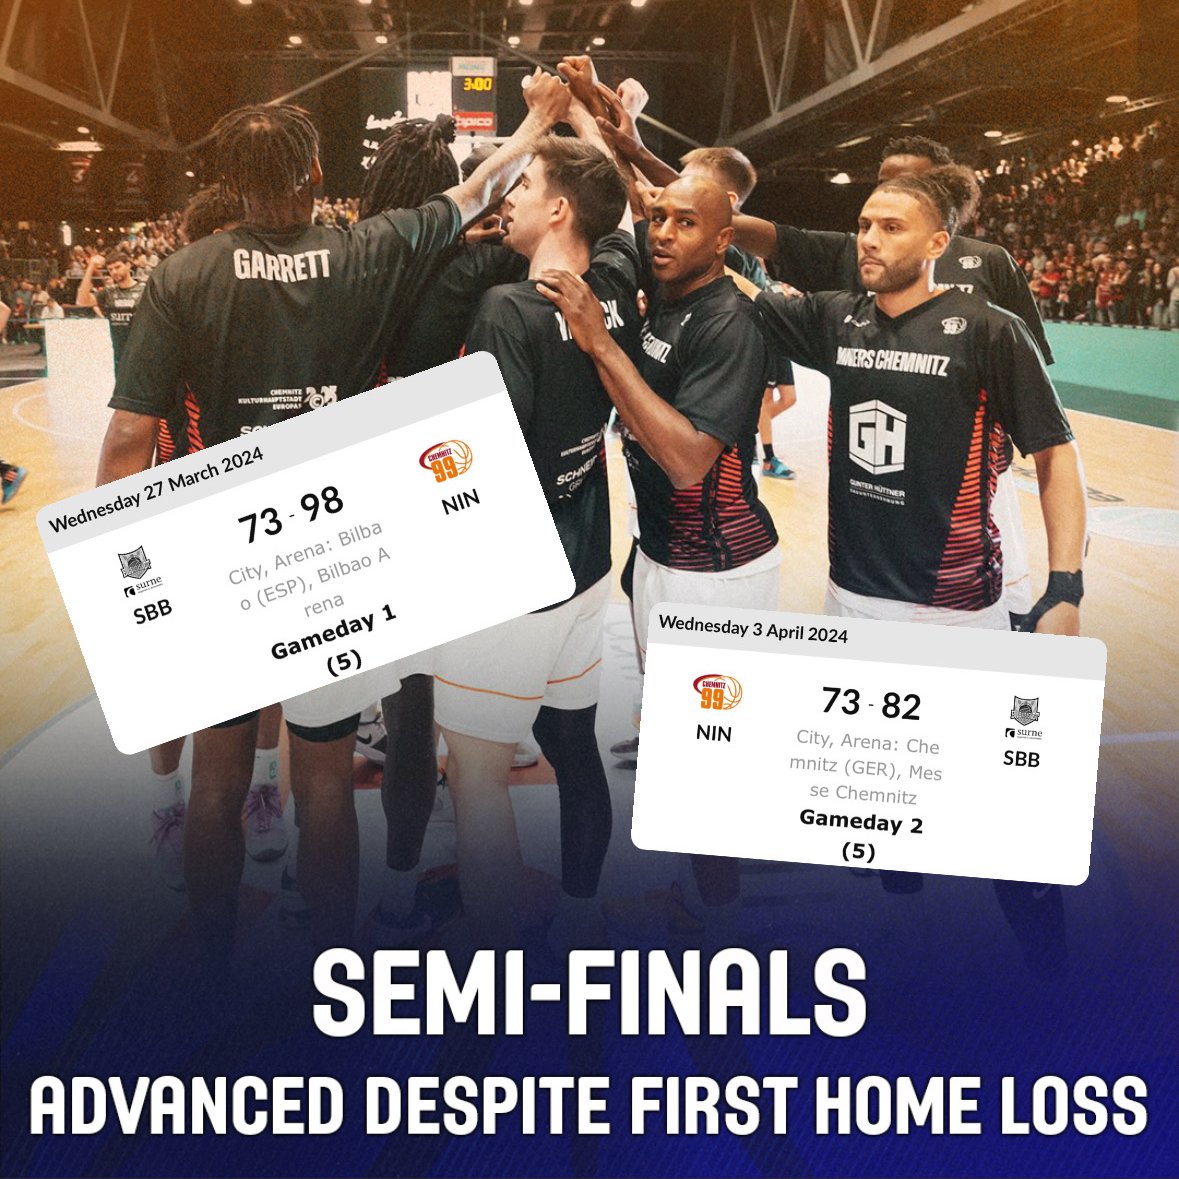 Are they gonna go all the way? ⏳ This is the road @ninerschemnitz took to reach the #FIBAEuropeCup Final. 🛣️